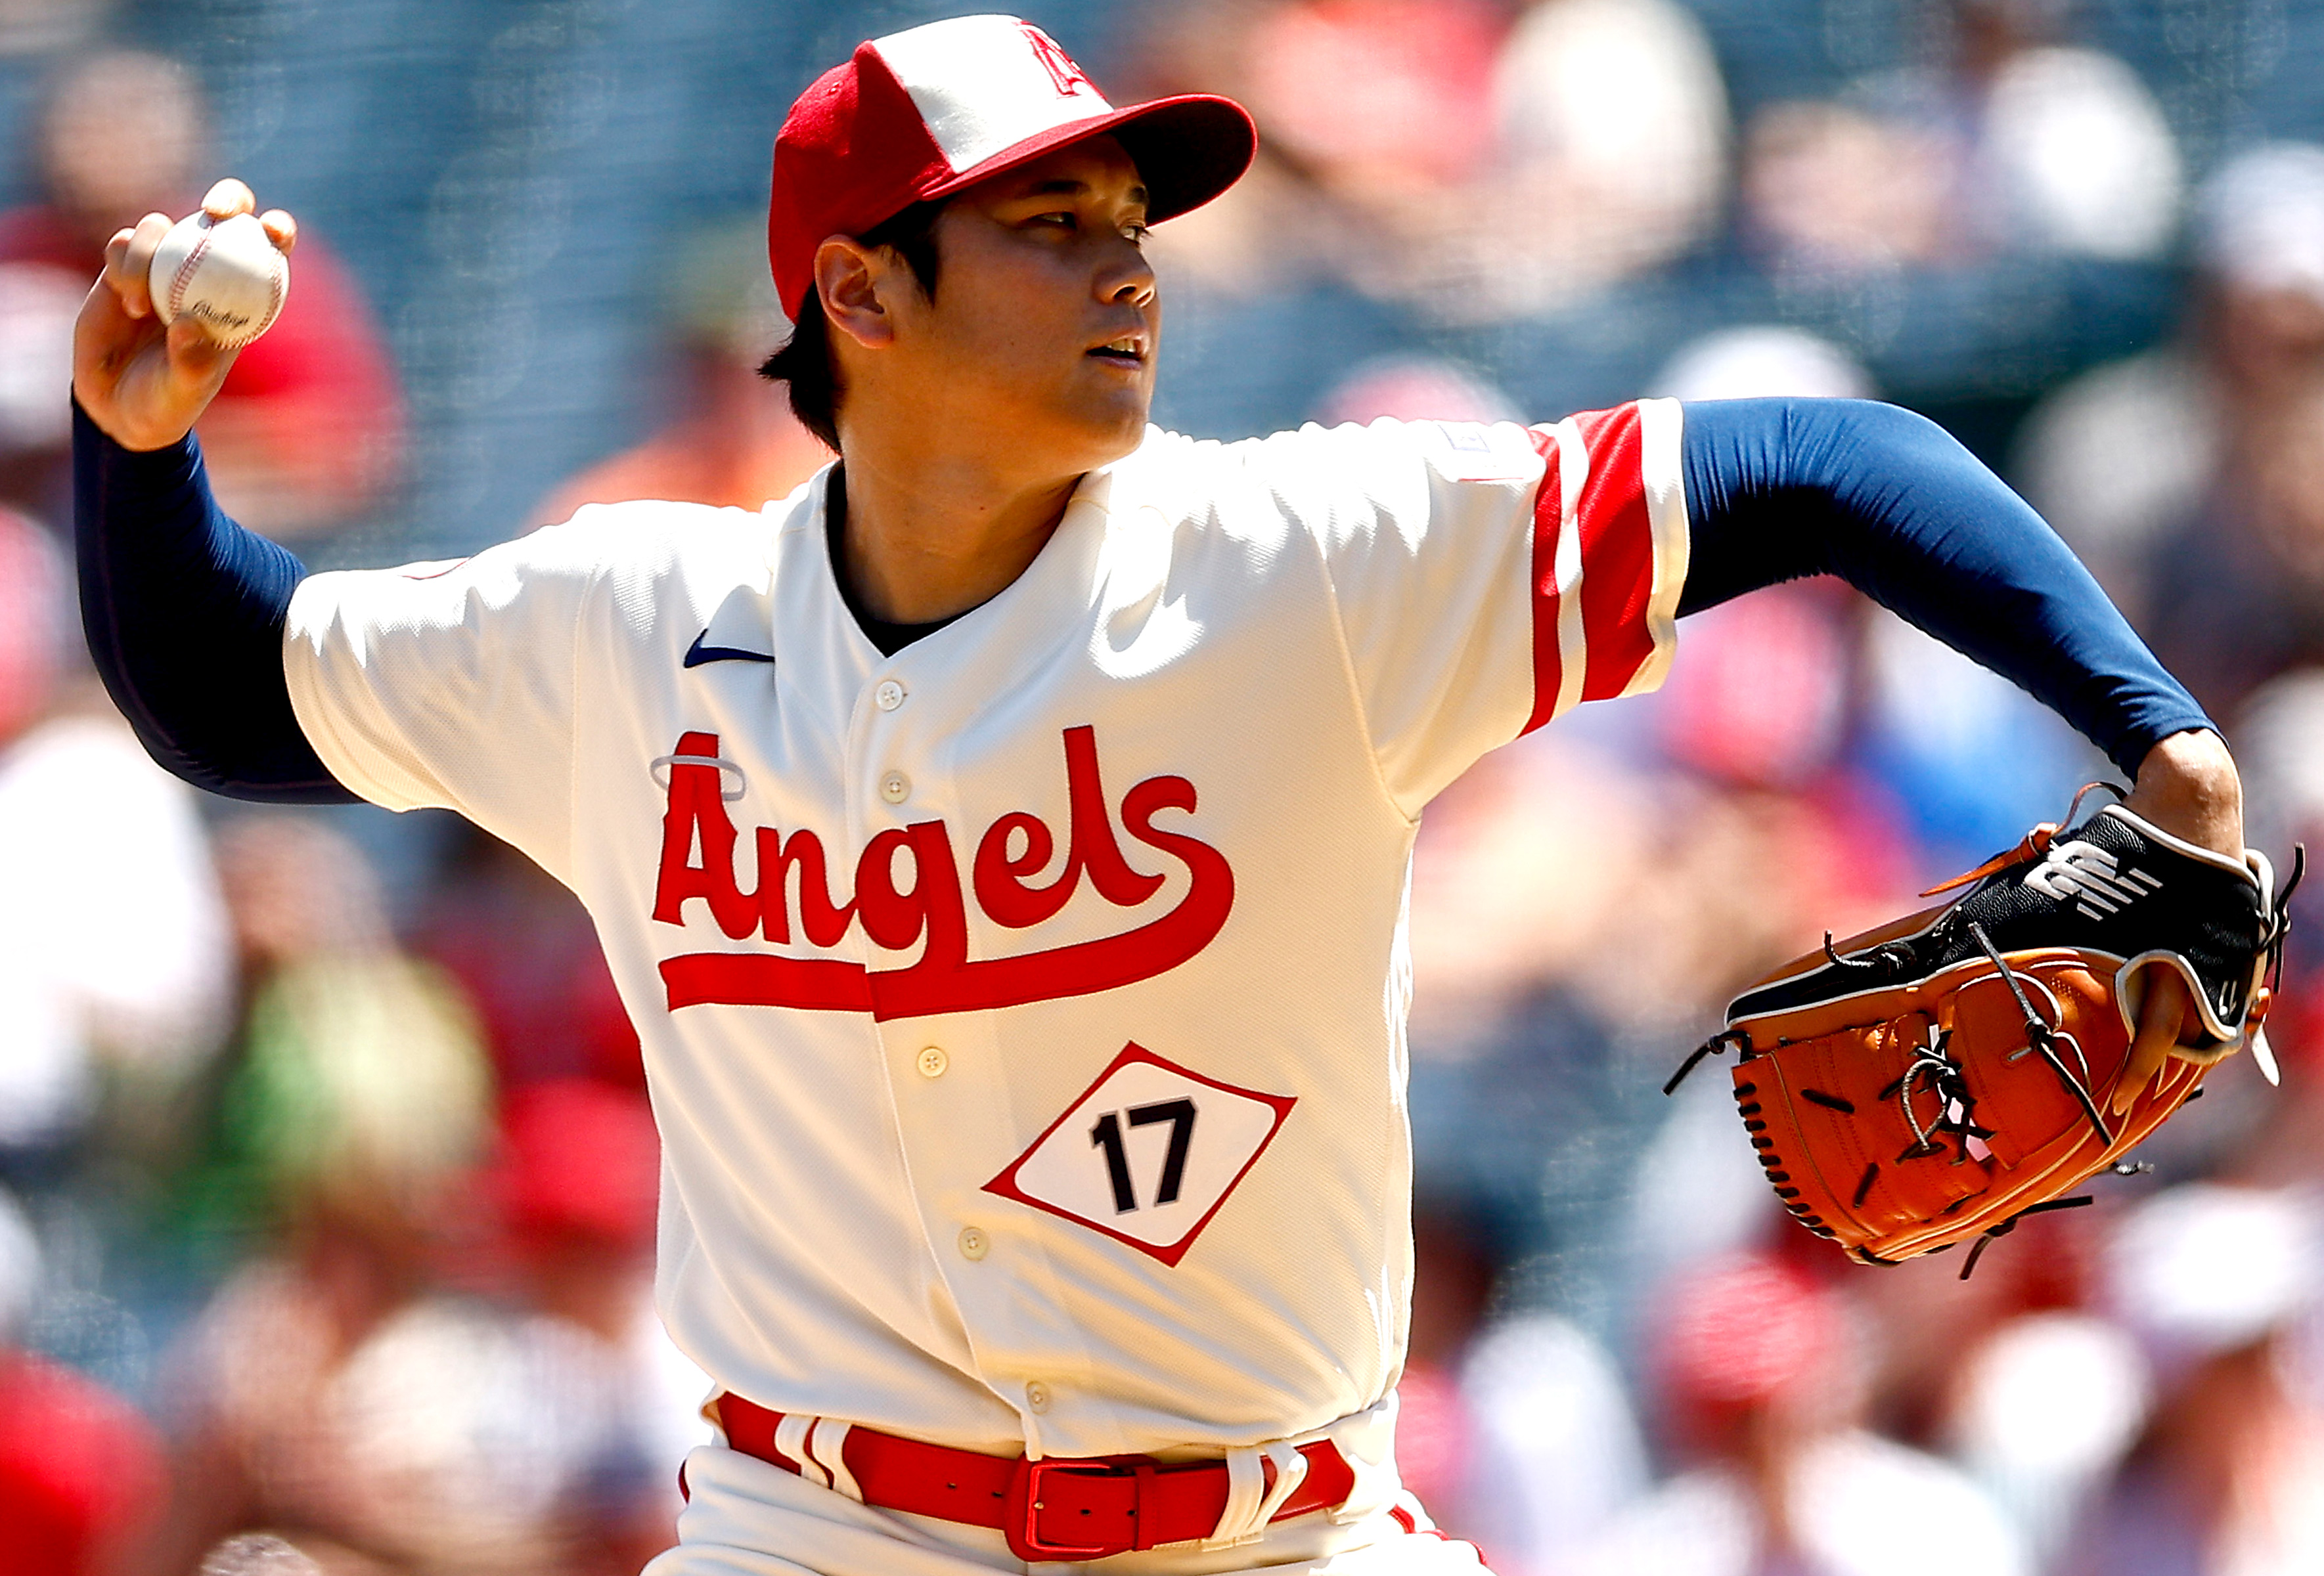 After His Injury, What Are the Options for L.A. Angels' Shohei Ohtani?